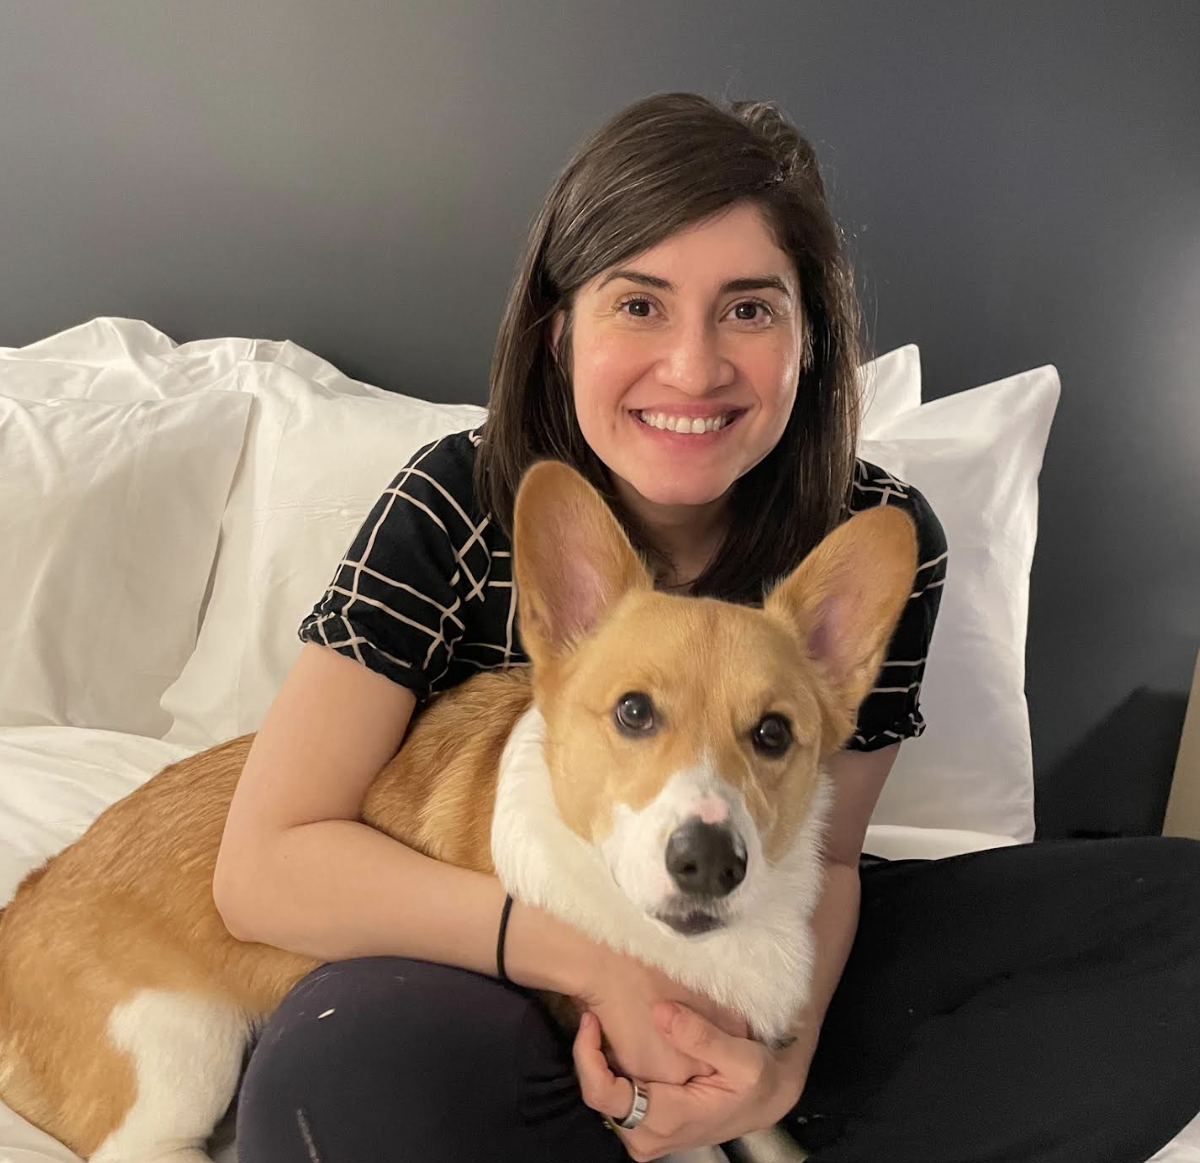 Woman smiling, sitting on a bed with a Corgi, in a cozy hotel room setting